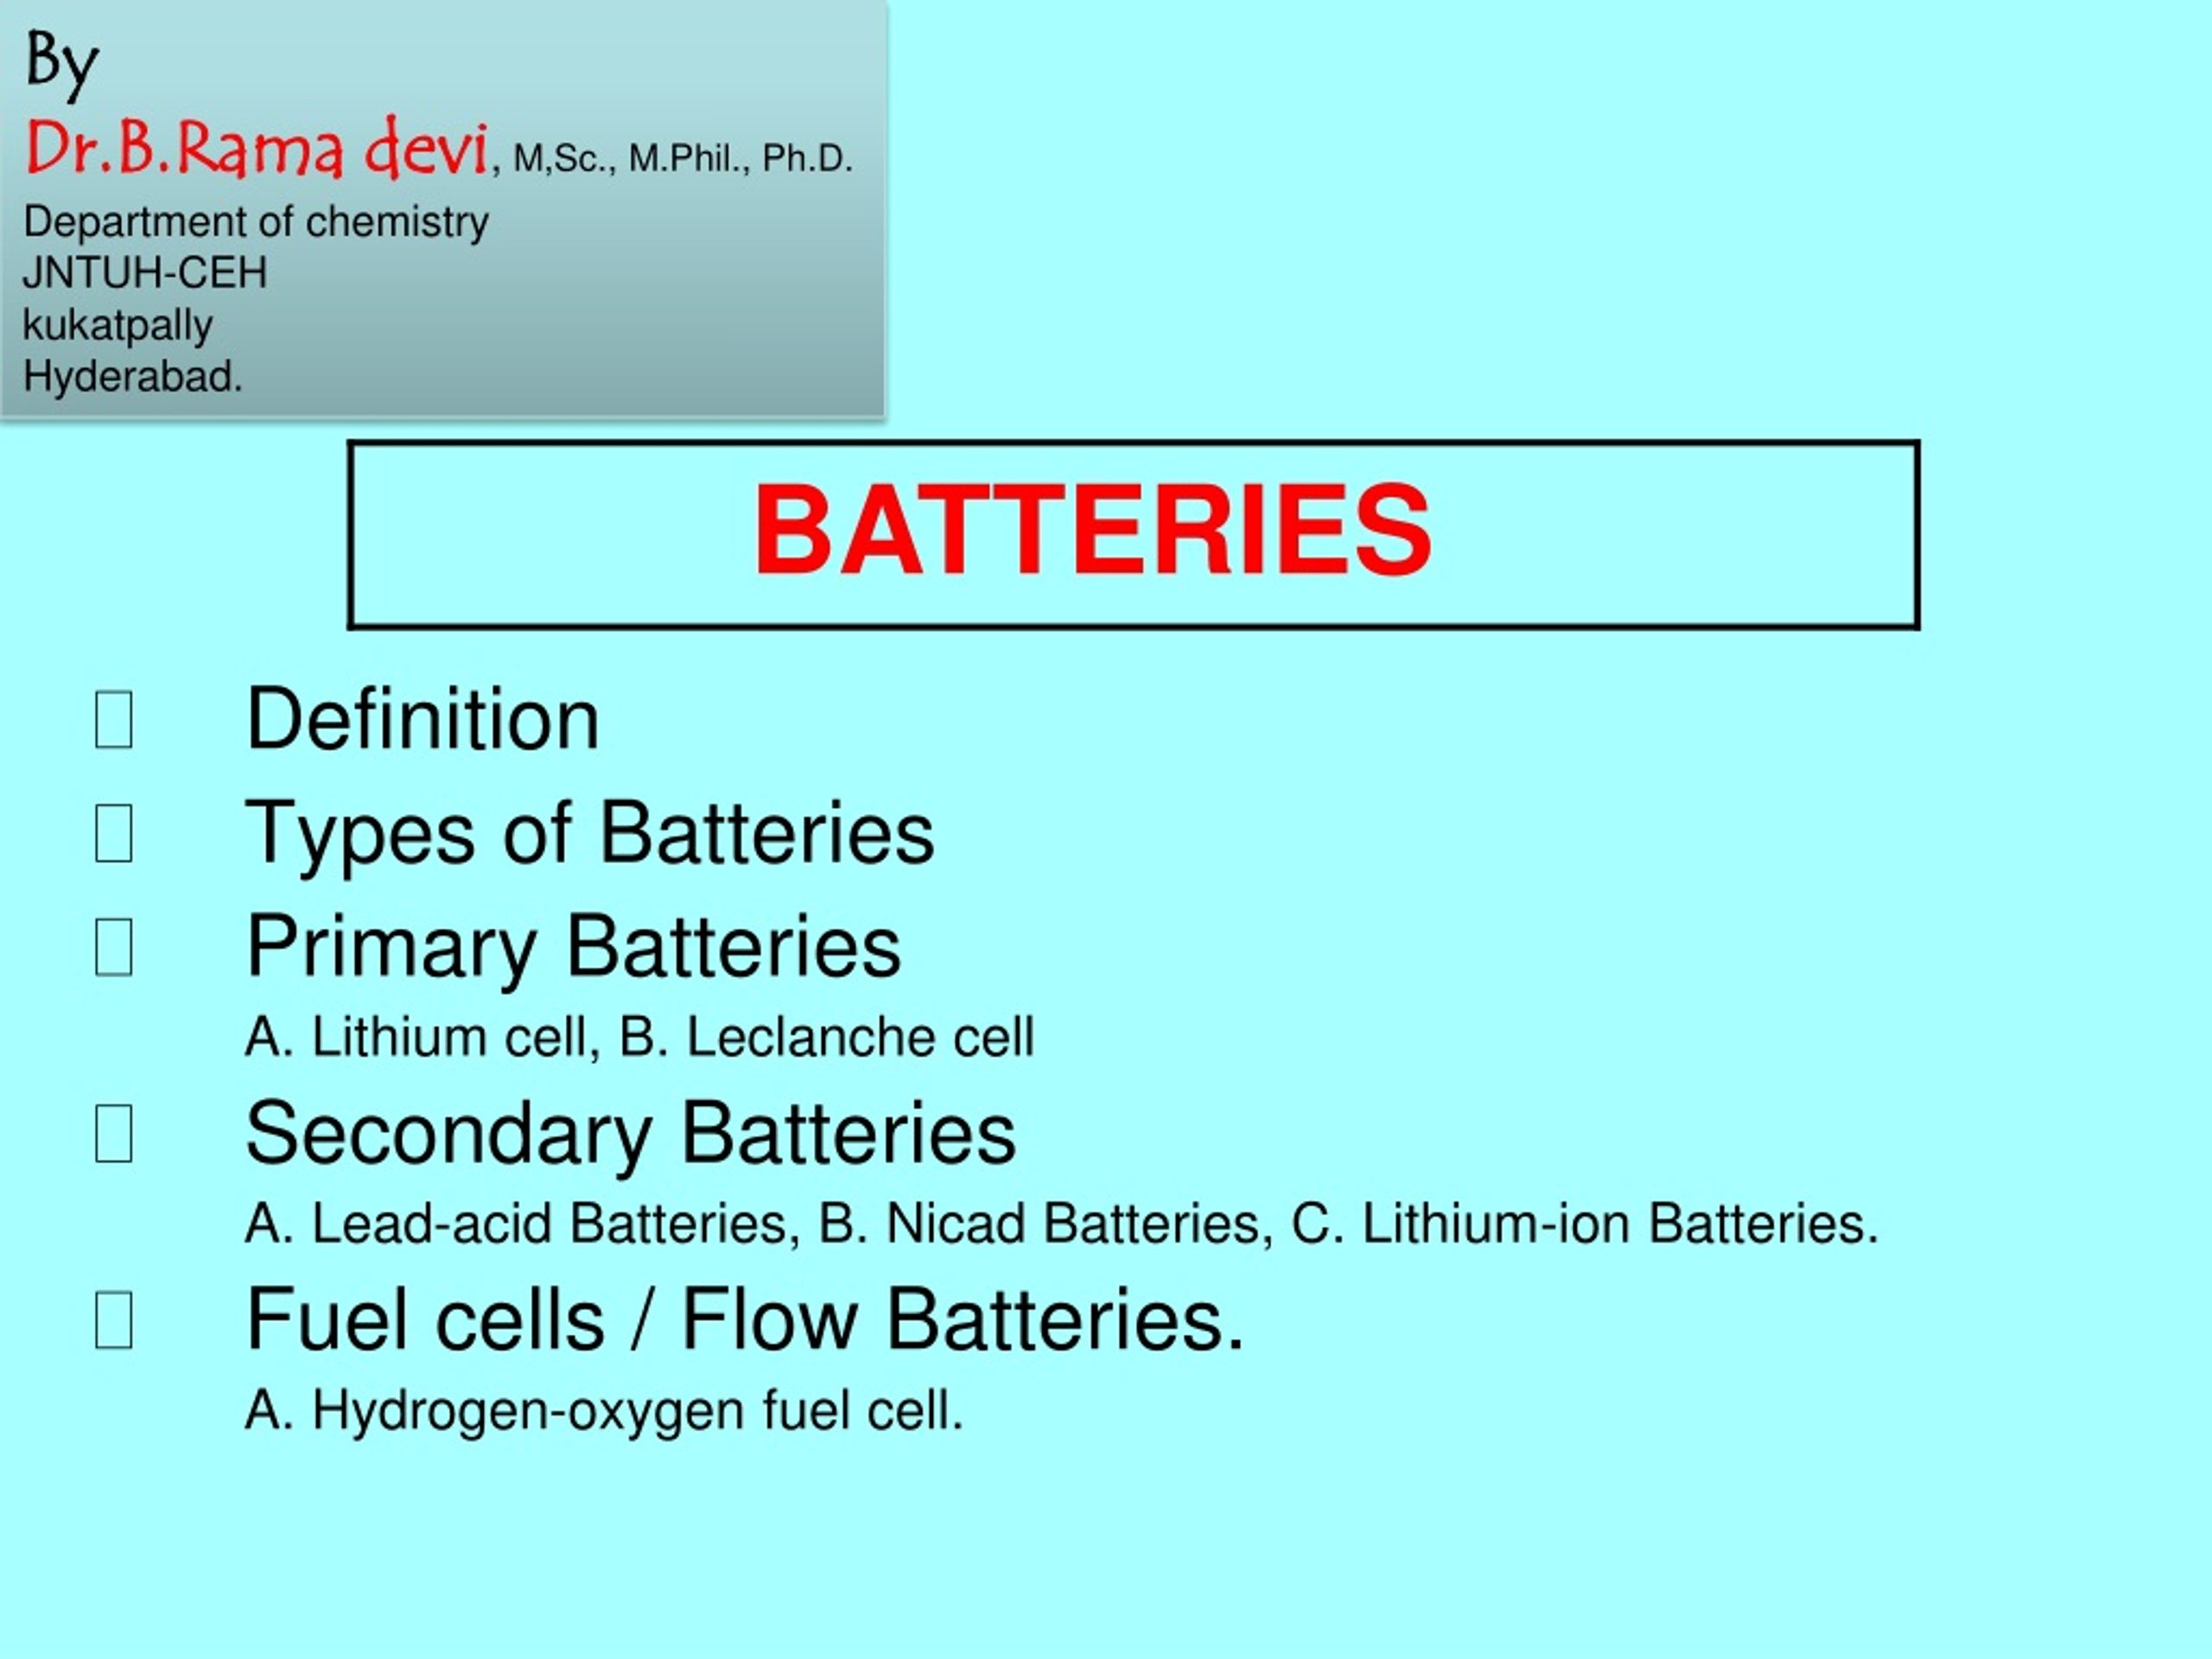 Types of Primary Batteries